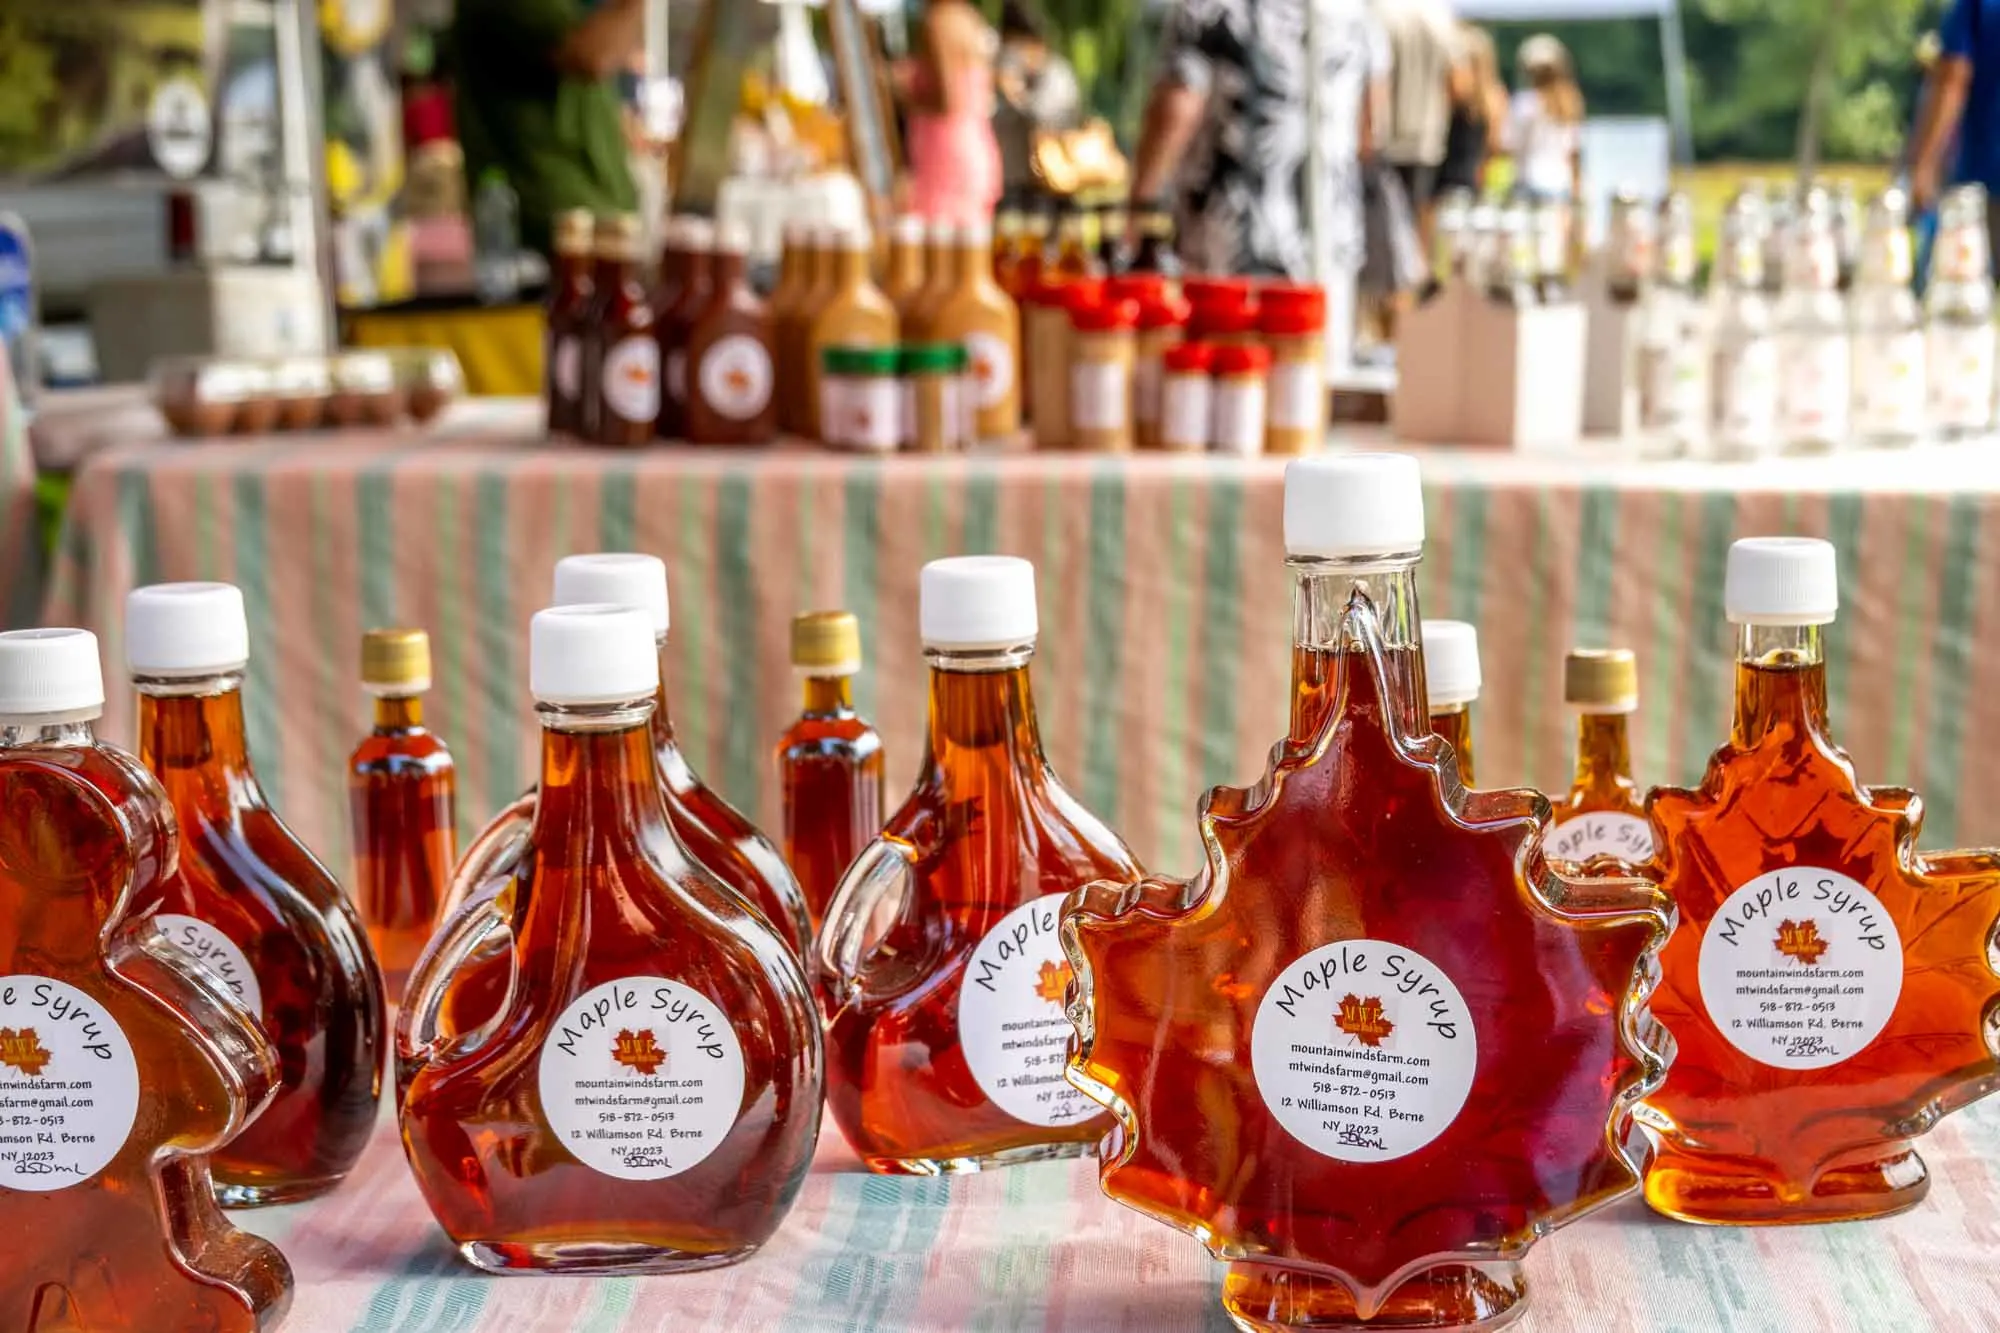 Bottles of maple syrup on a table.